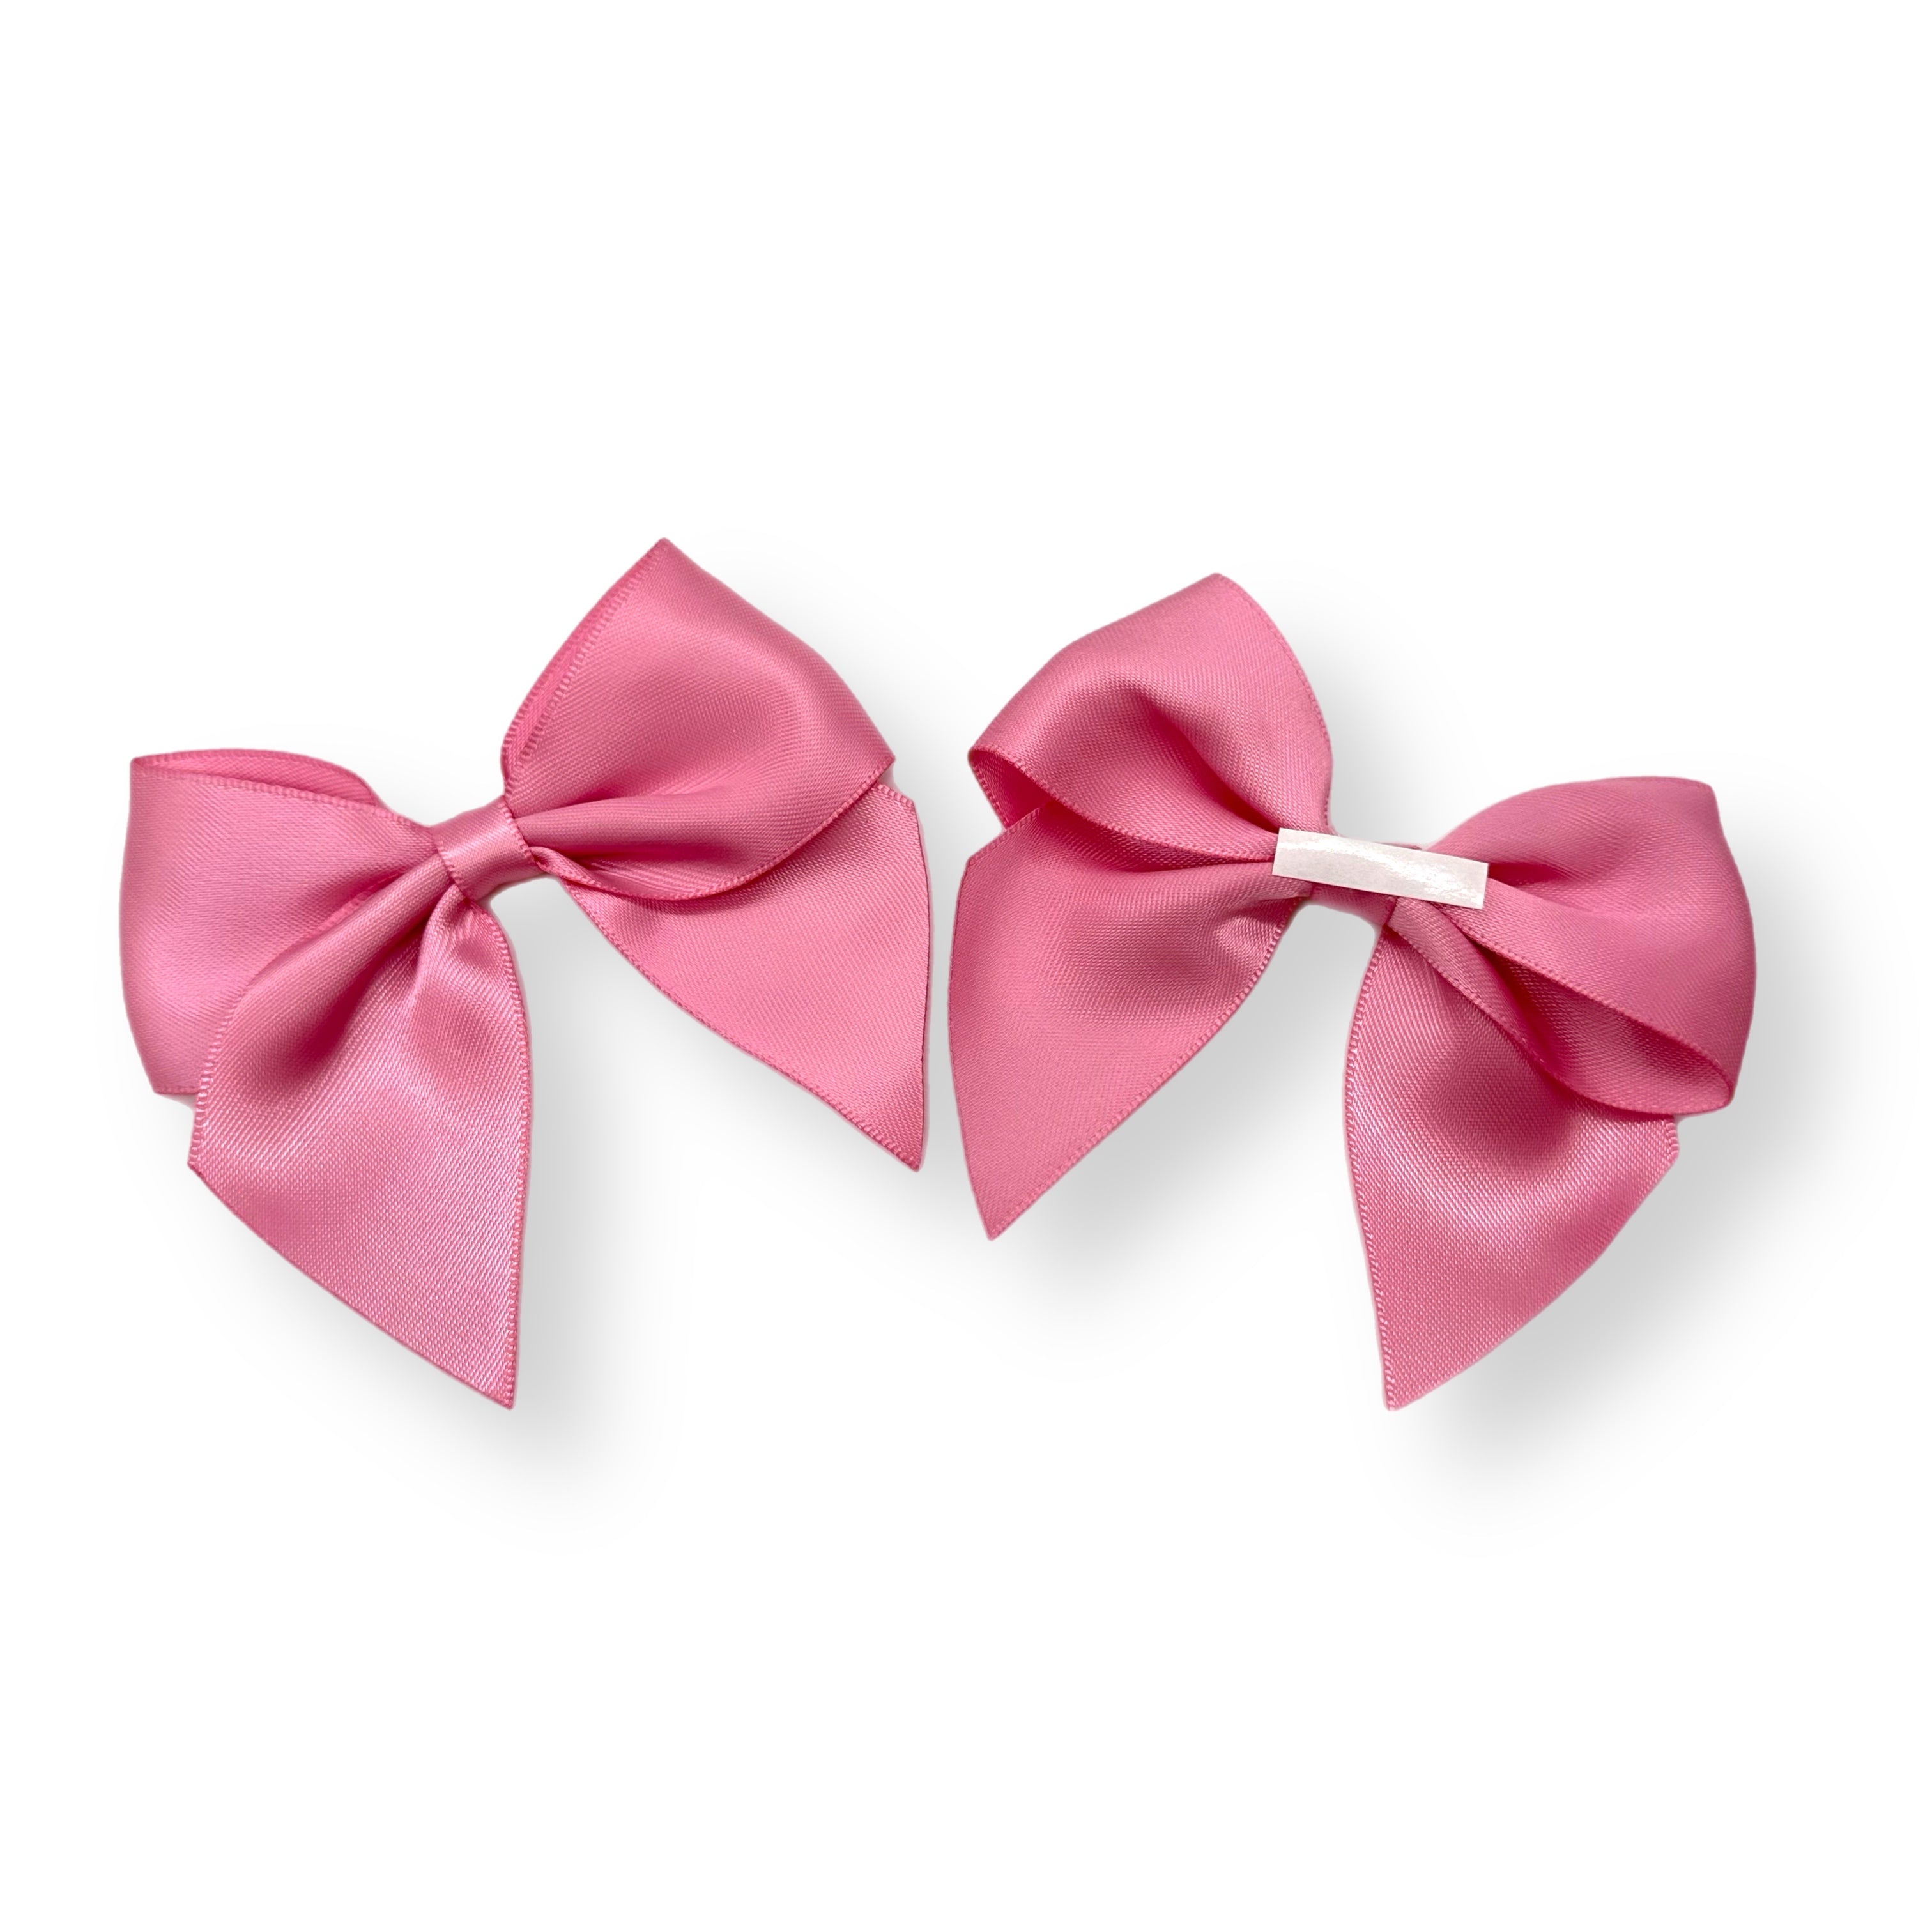 Satin Bows with adhesive tab- Pack of 6